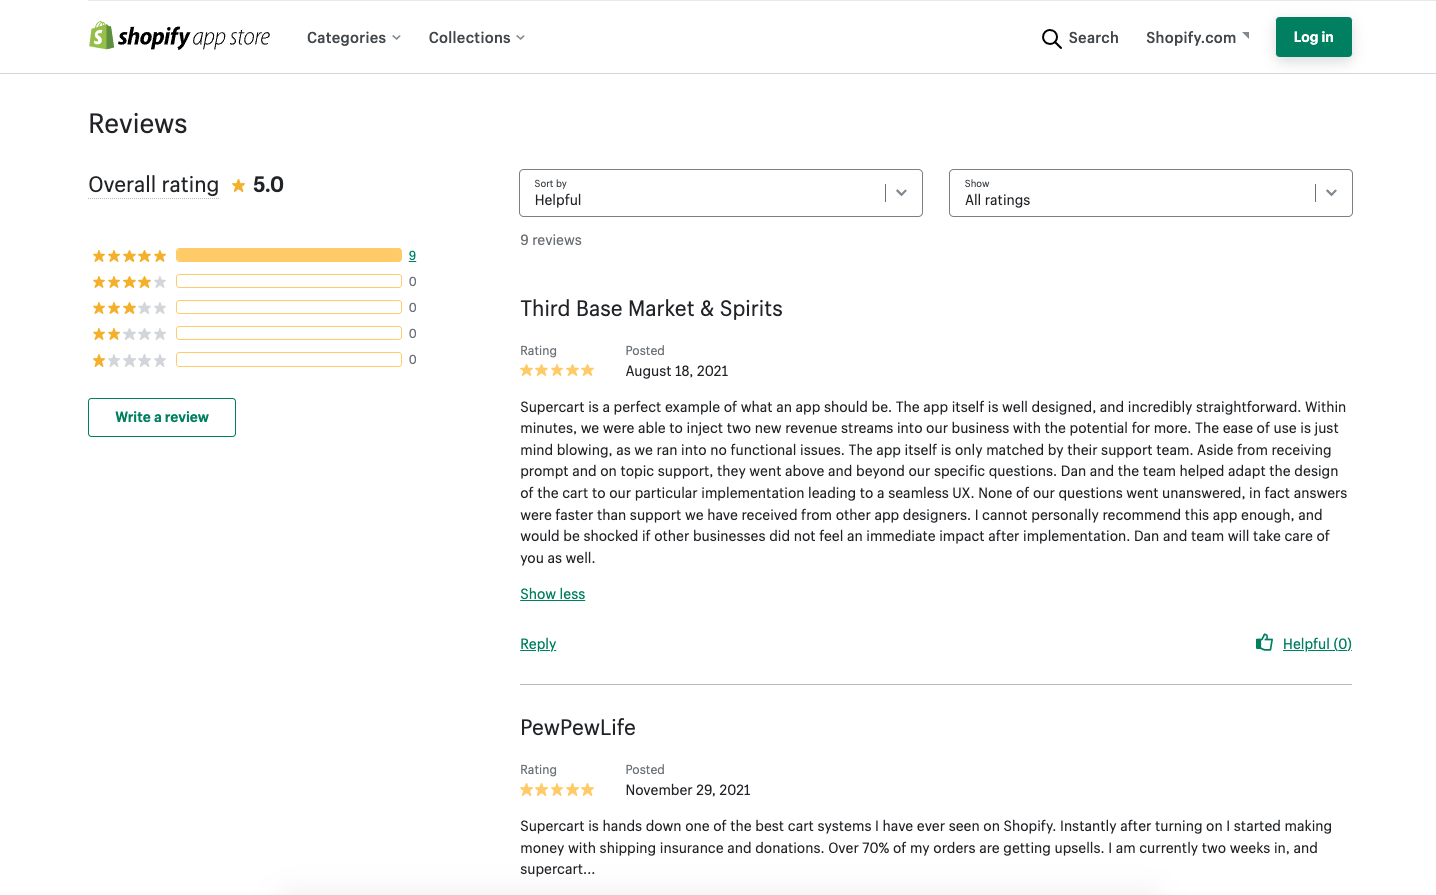 Supercart Shopify Reviews Section